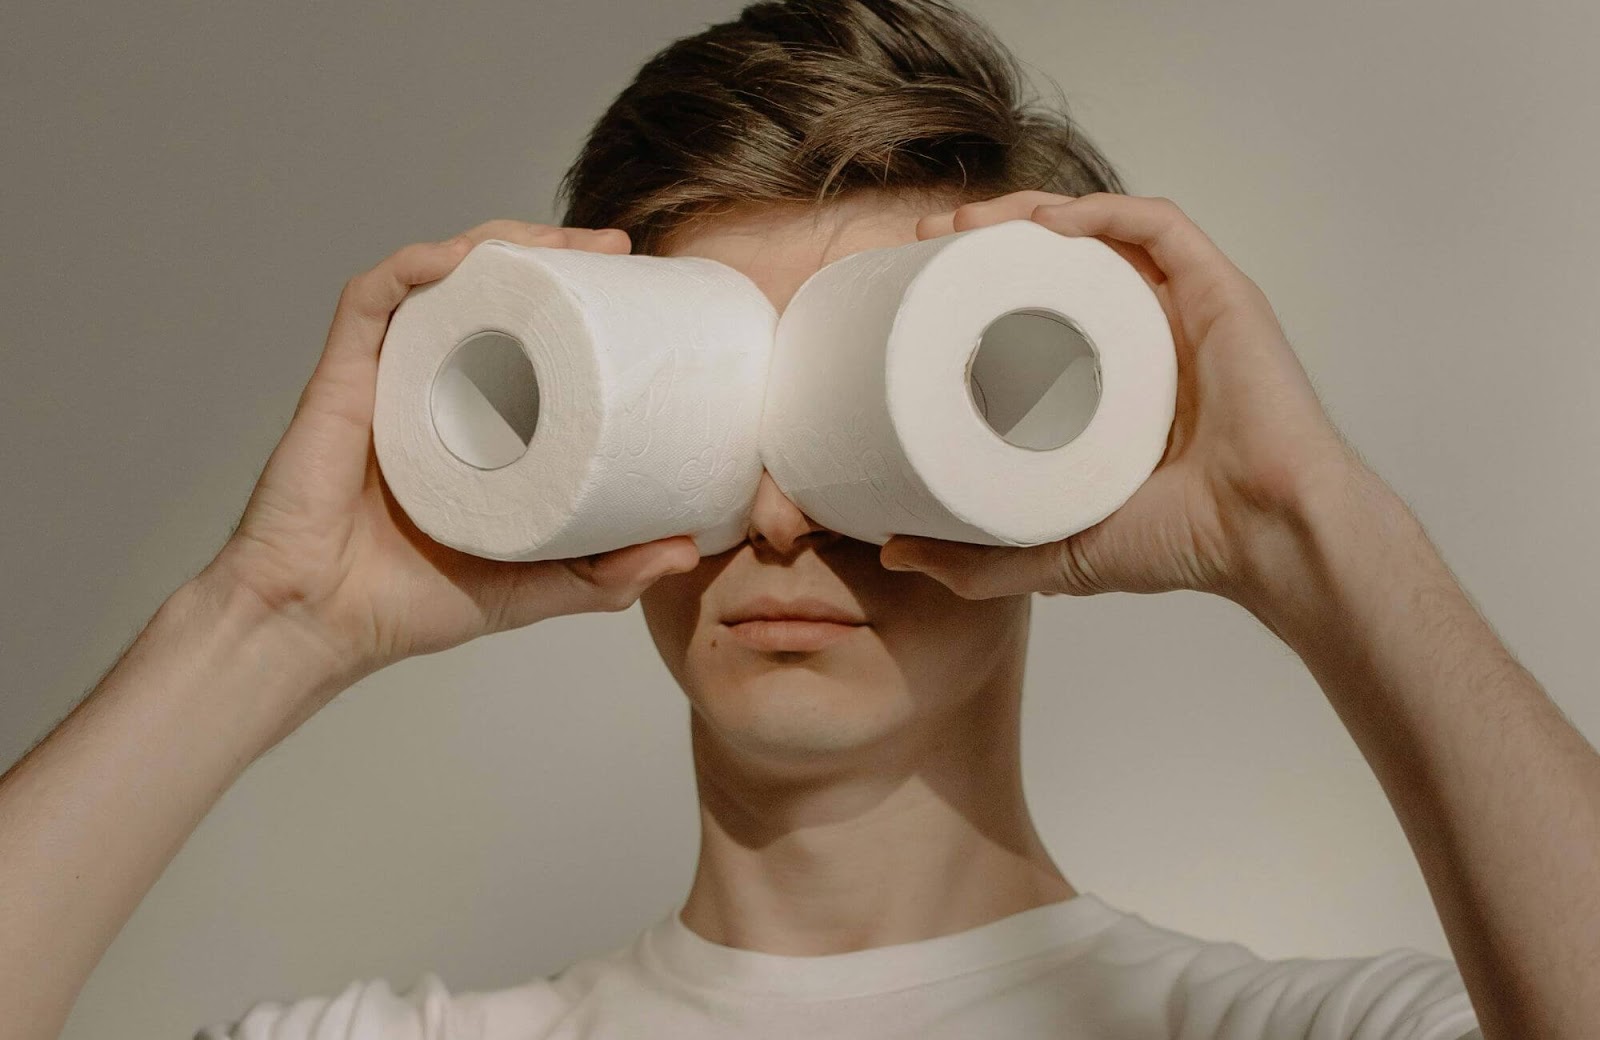 A man holding two toilet rolls up to his eyes like binoculars